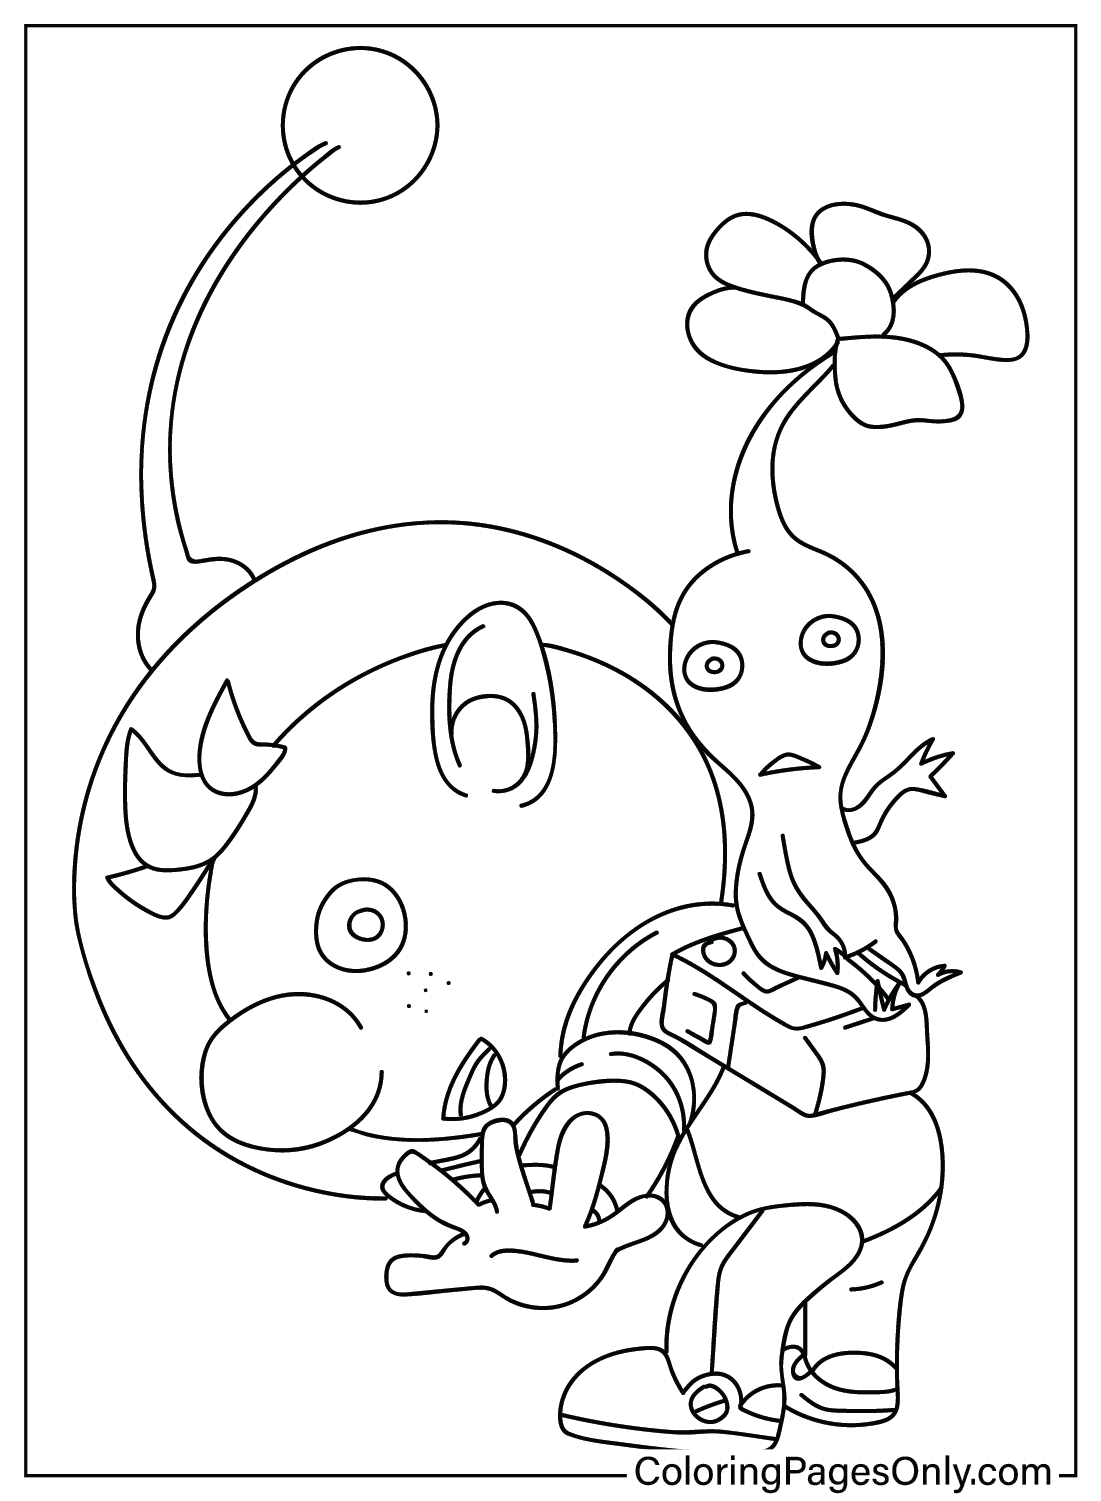 Coloring Page Pikmin from Pikmin